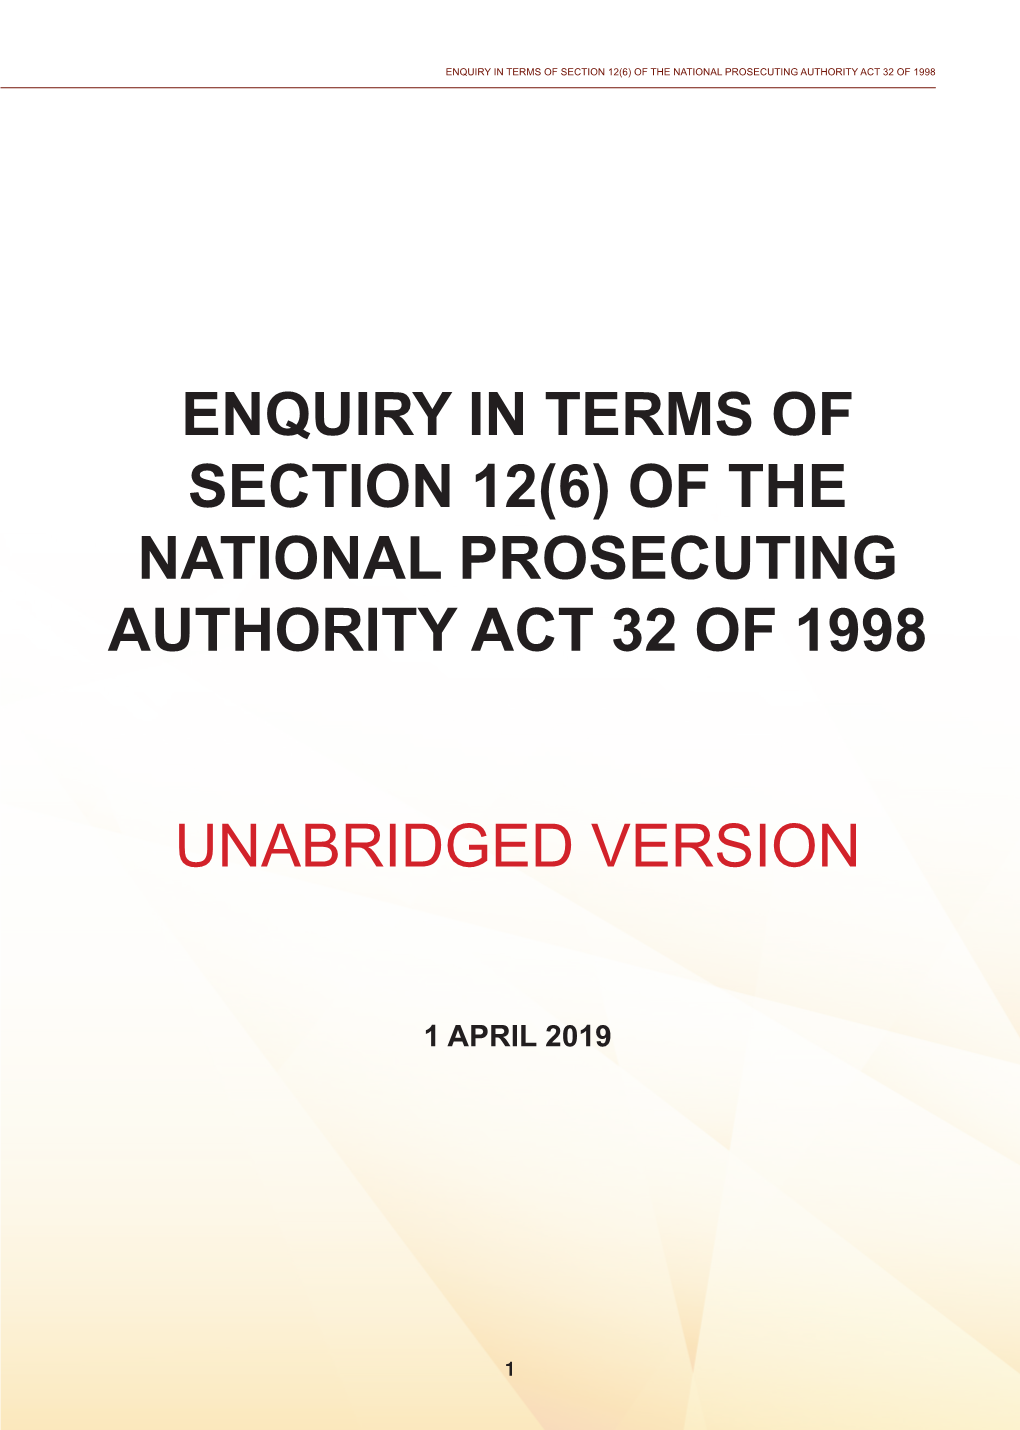 Enquiry in Terms of Section 12(6) of the National Prosecuting Authority Act 32 of 1998